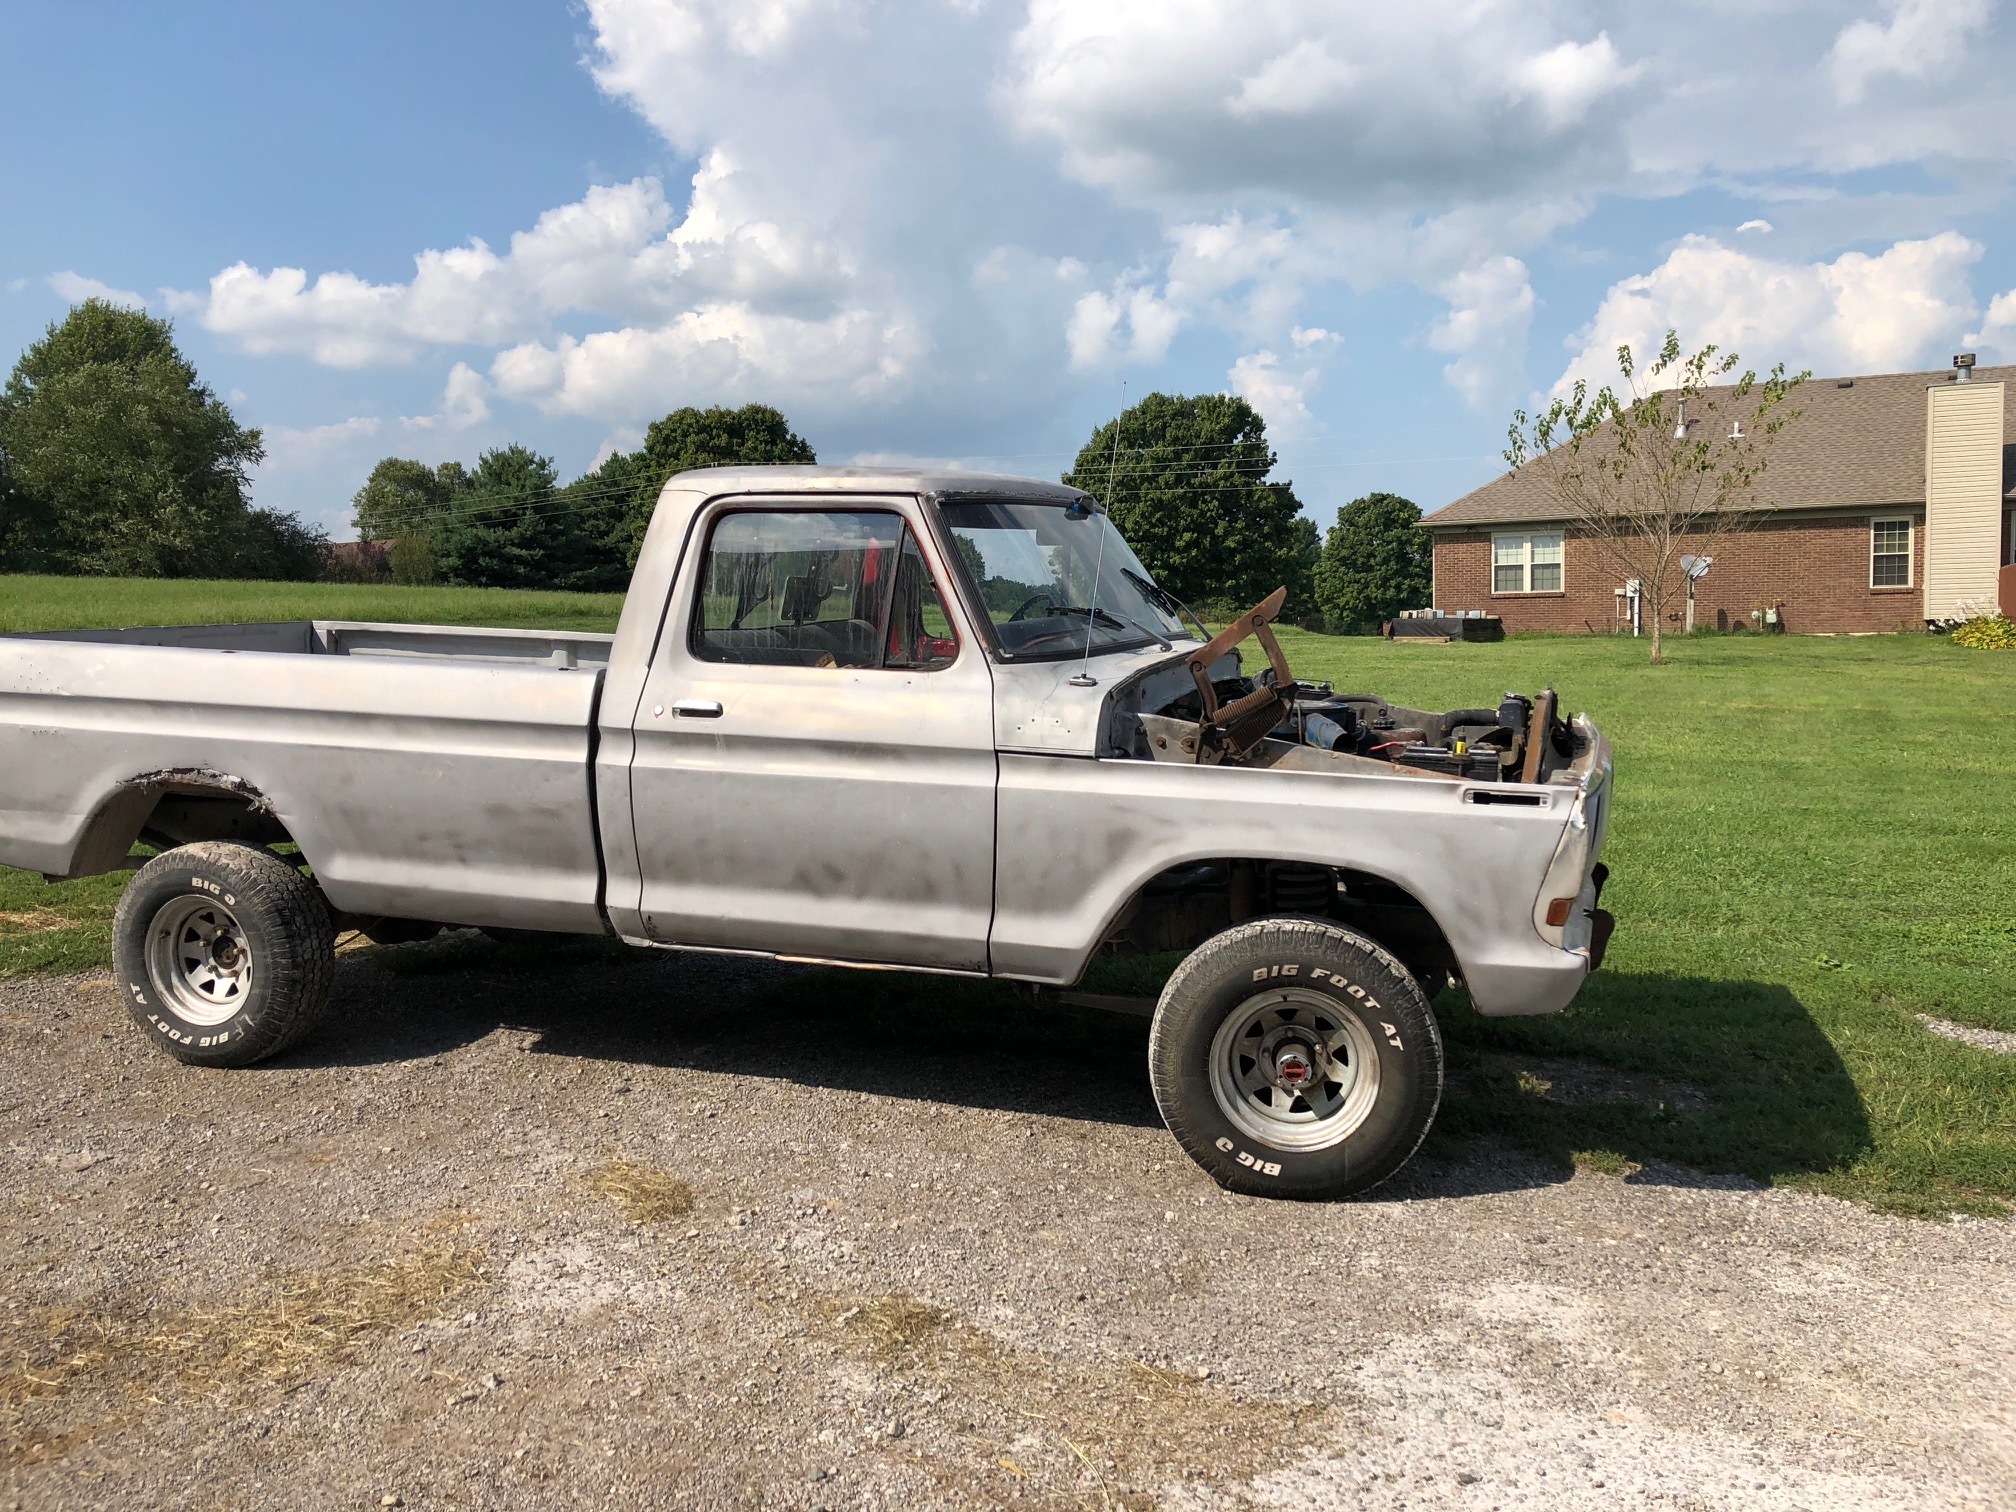 70's Ford Pickup Truck After